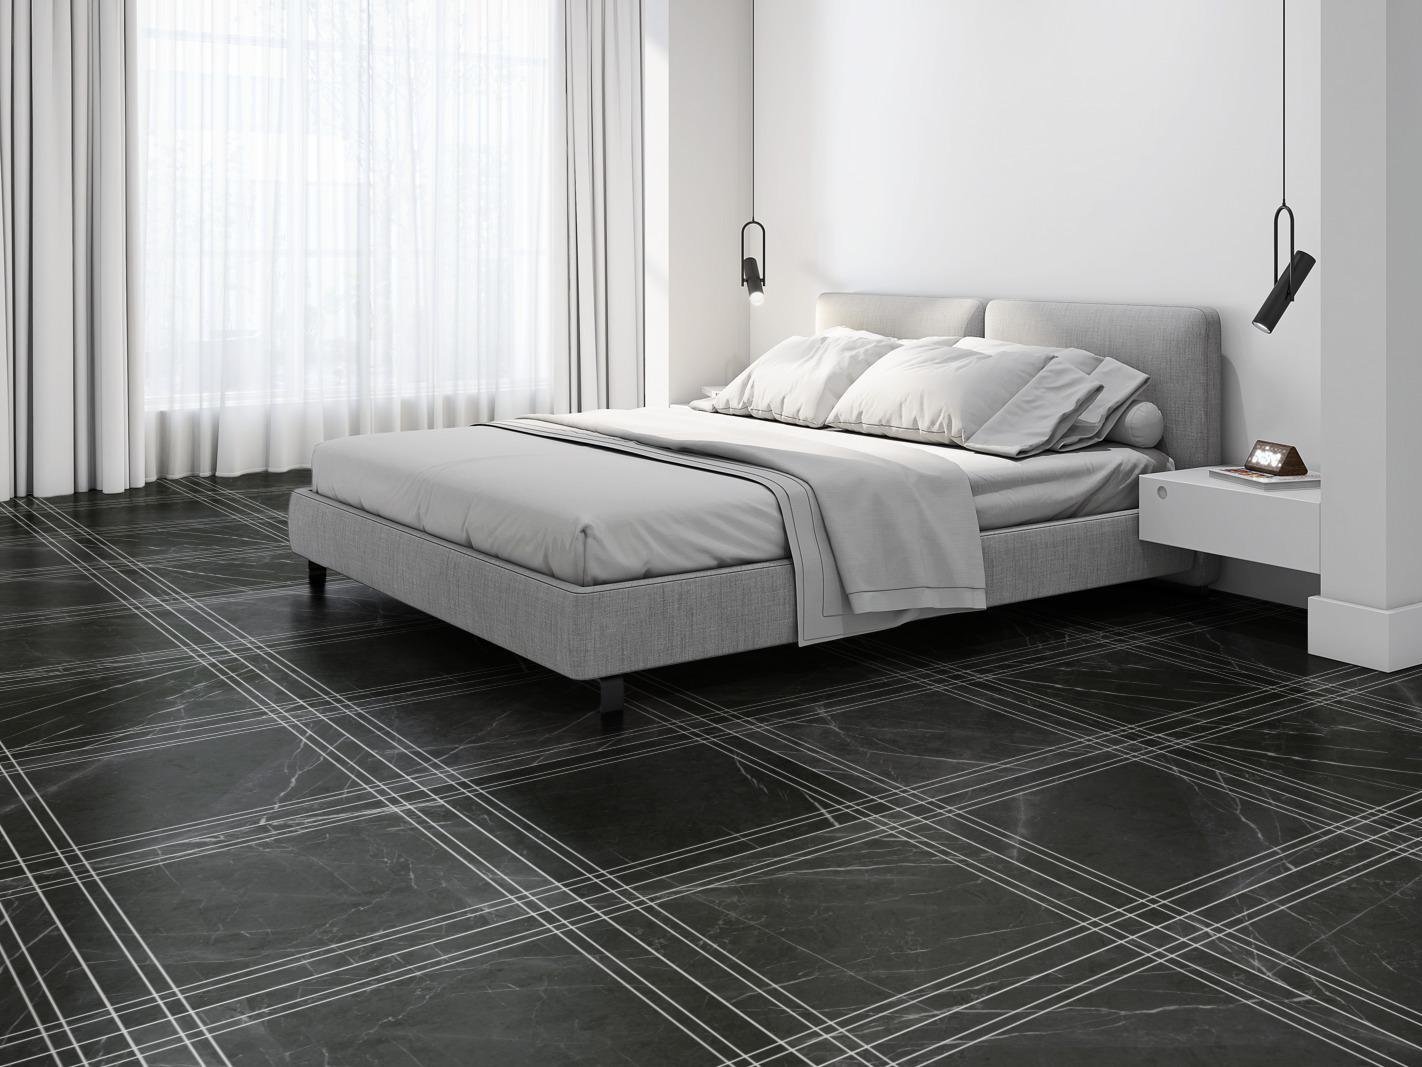 Hollis Plaid, Pattern A, Grande Scale, Marquina Matte, Warm Gray Grout